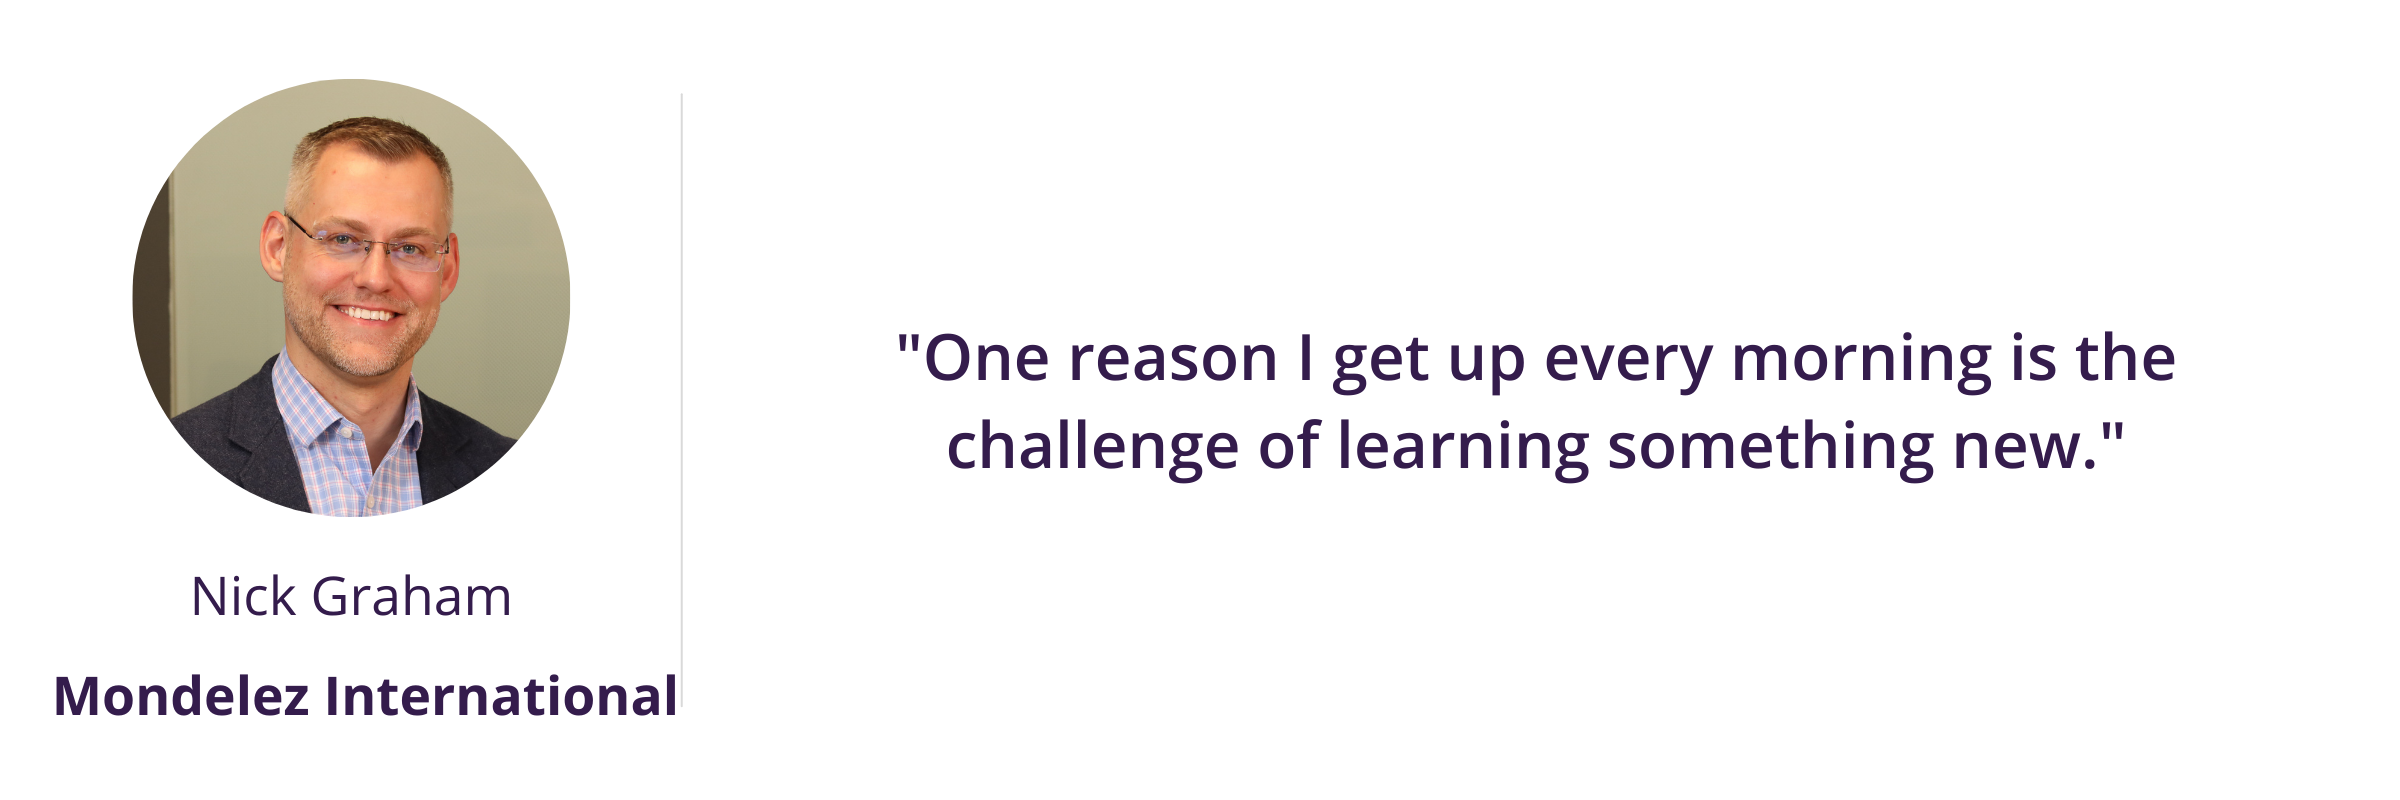 "One reason I get up every morning is the challenge of learning something new."